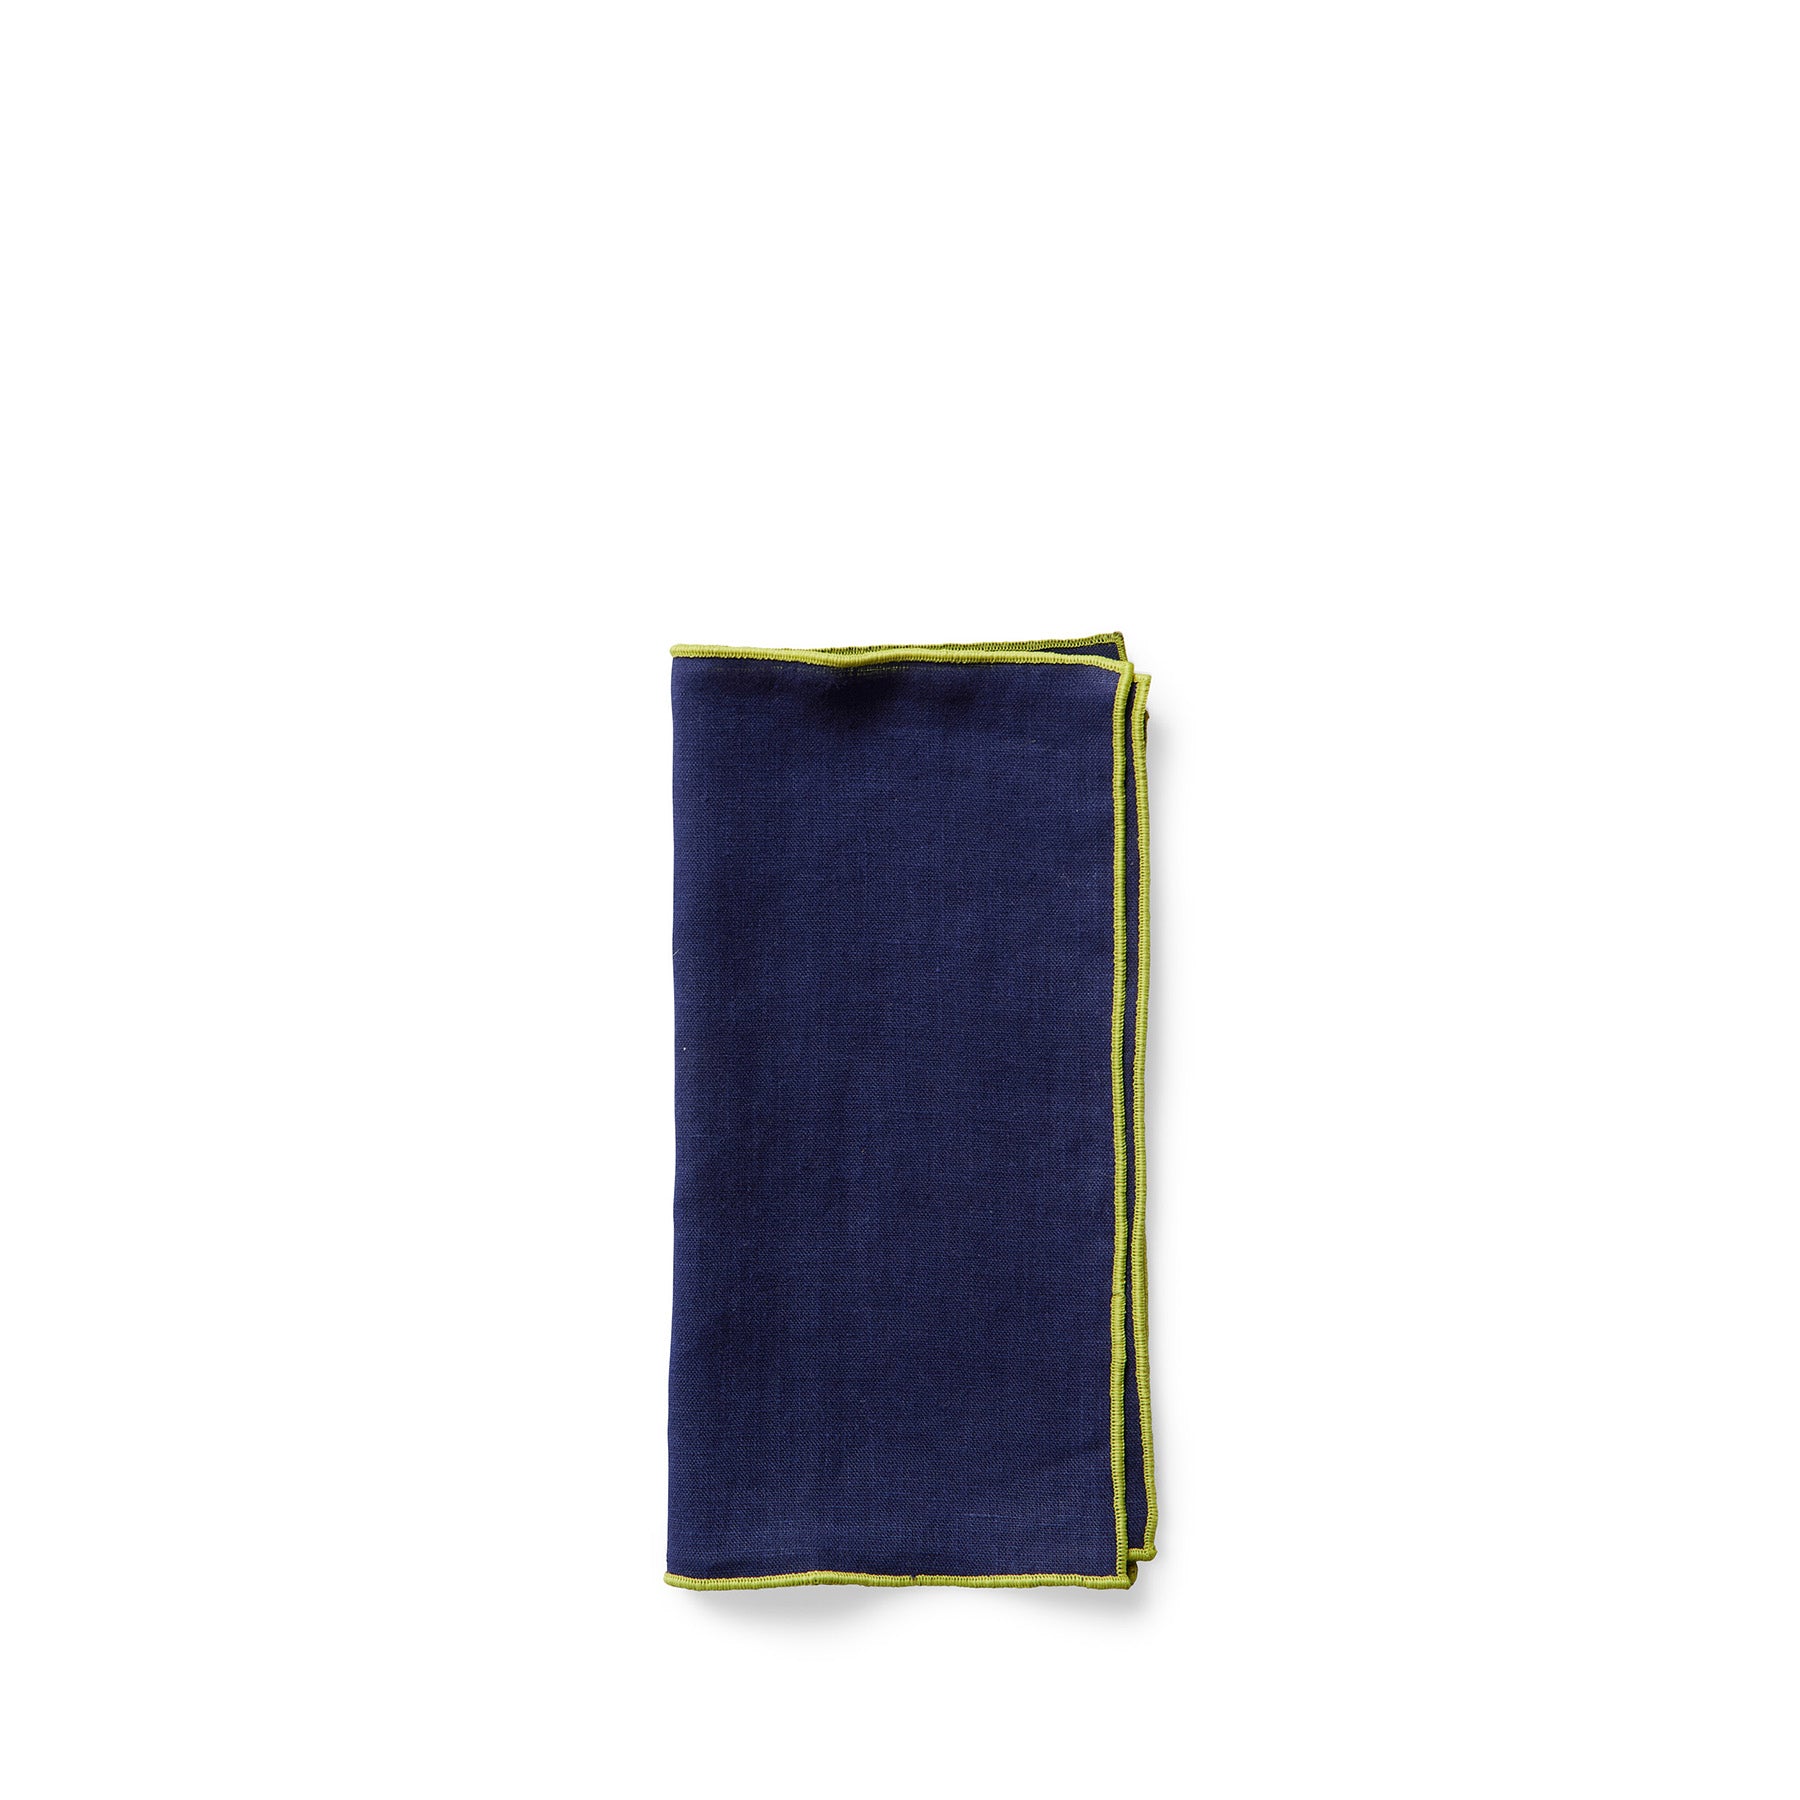 Small Napkin in Navy (Set of 4) Zoom Image 1